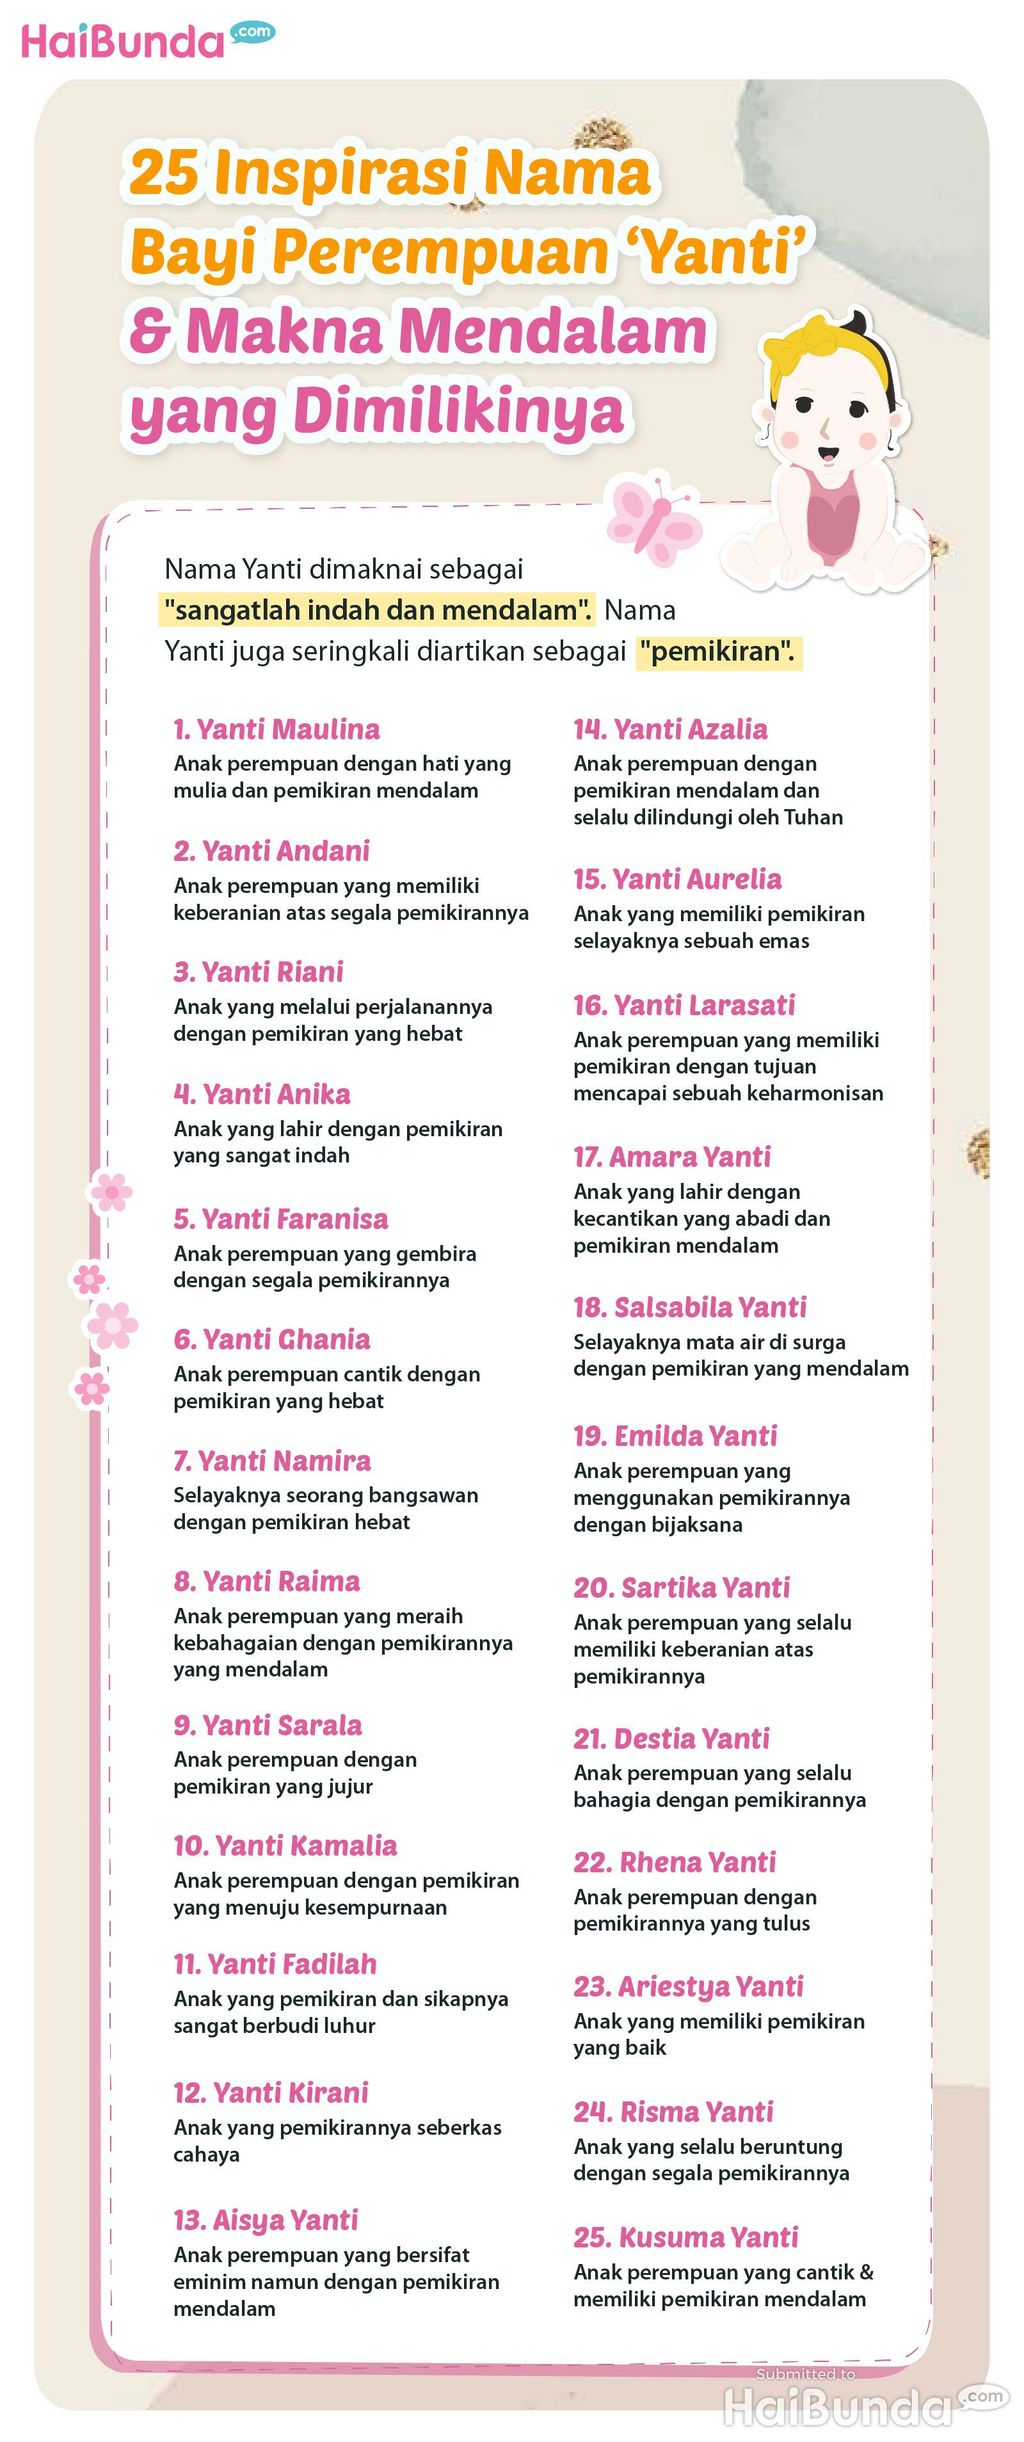 Infographics of 25 inspirations for the name 'Yanti' for baby girls & the deep meaning they have